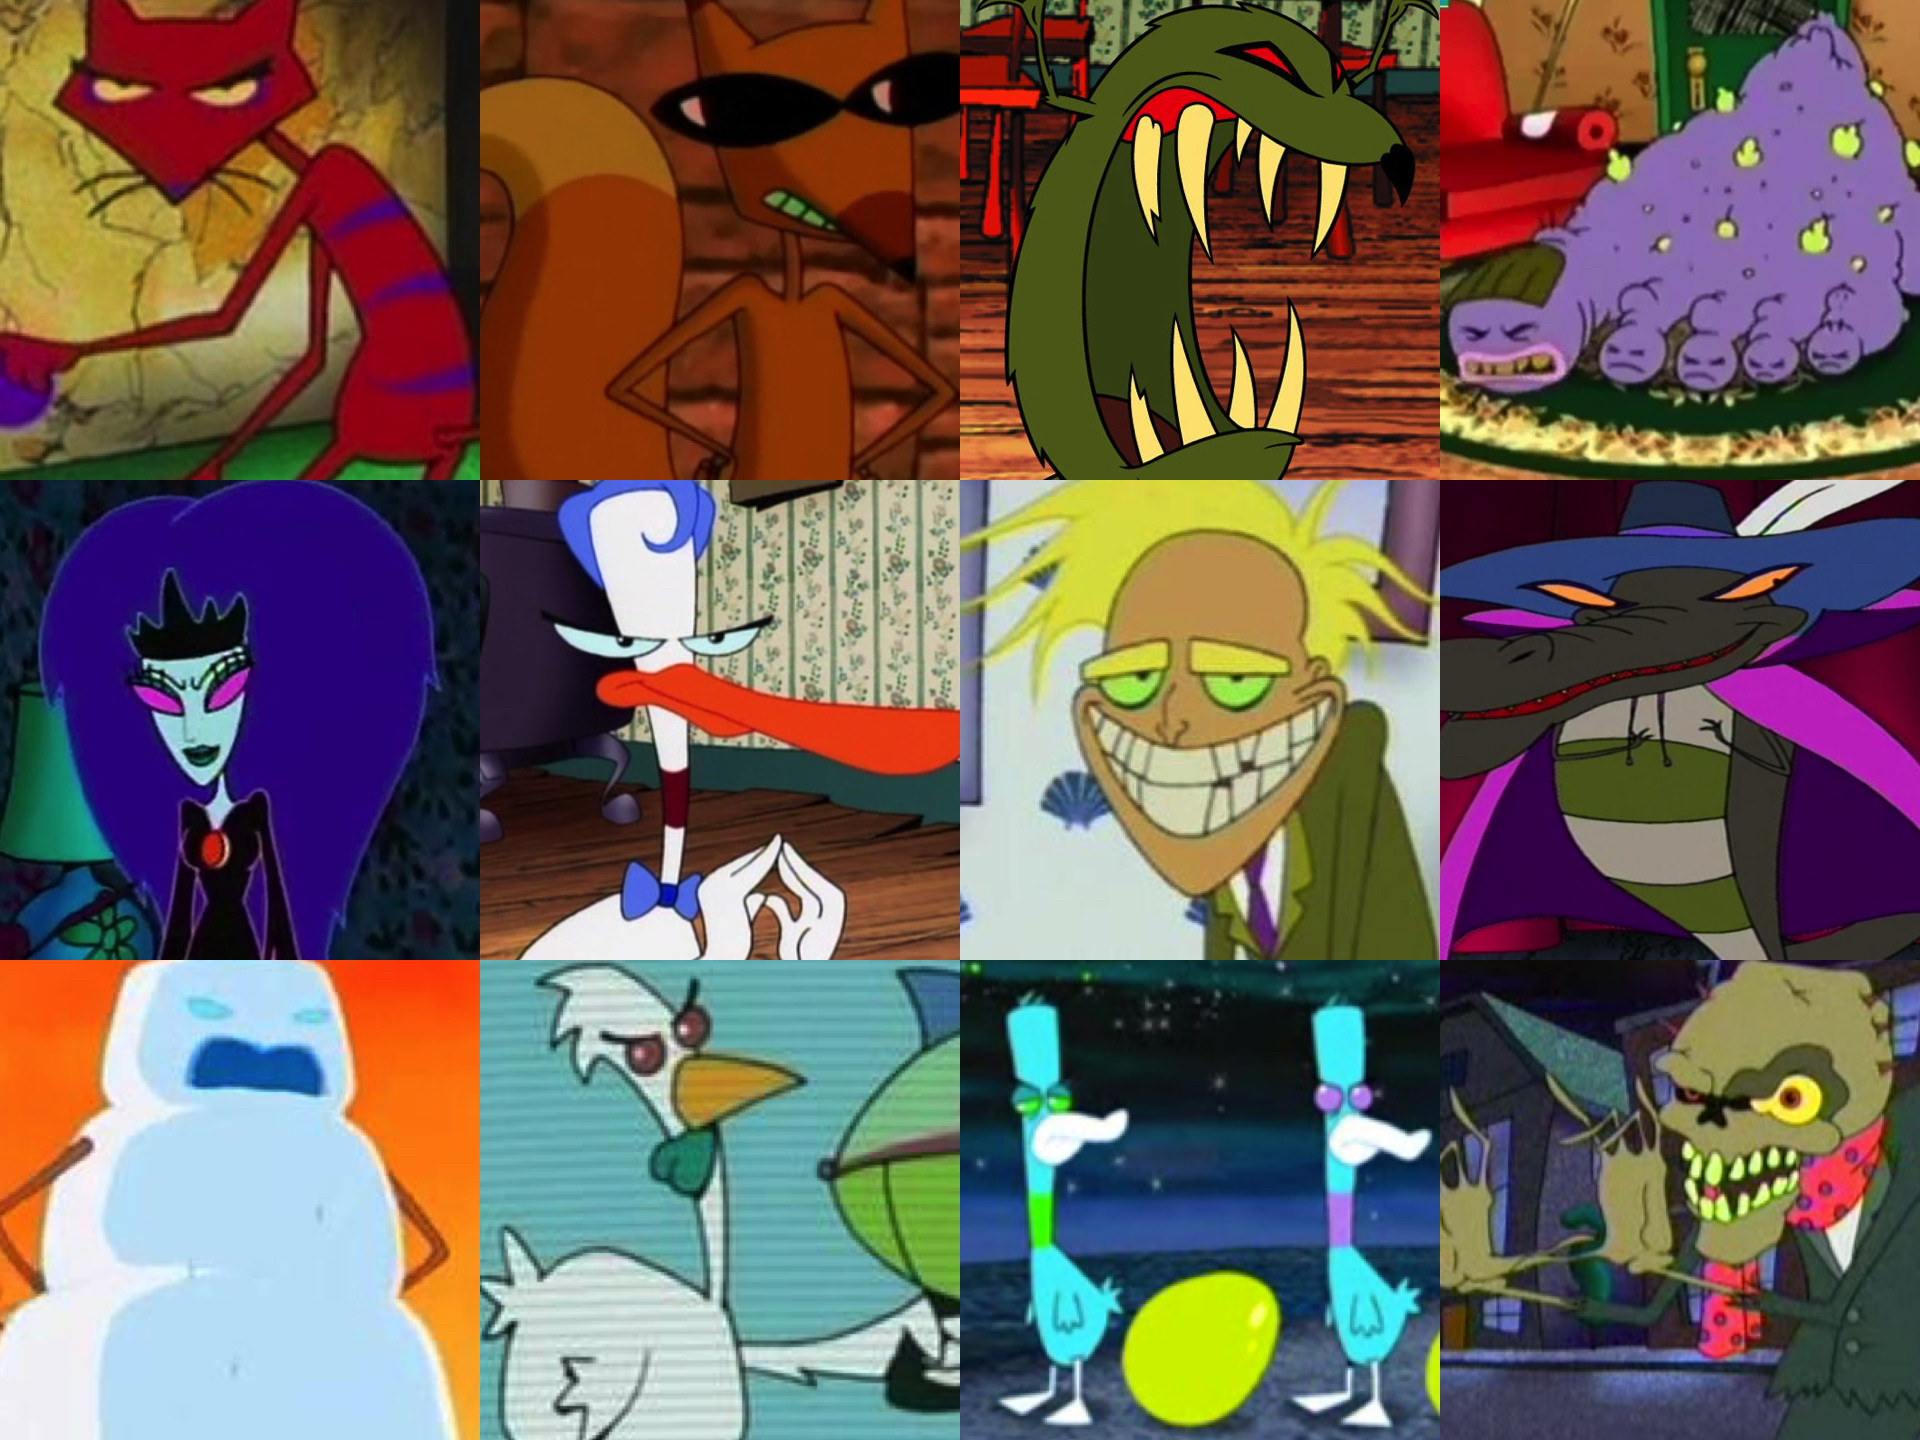 1920x1440 ... Courage the Cowardly Dog Villains by Legion472